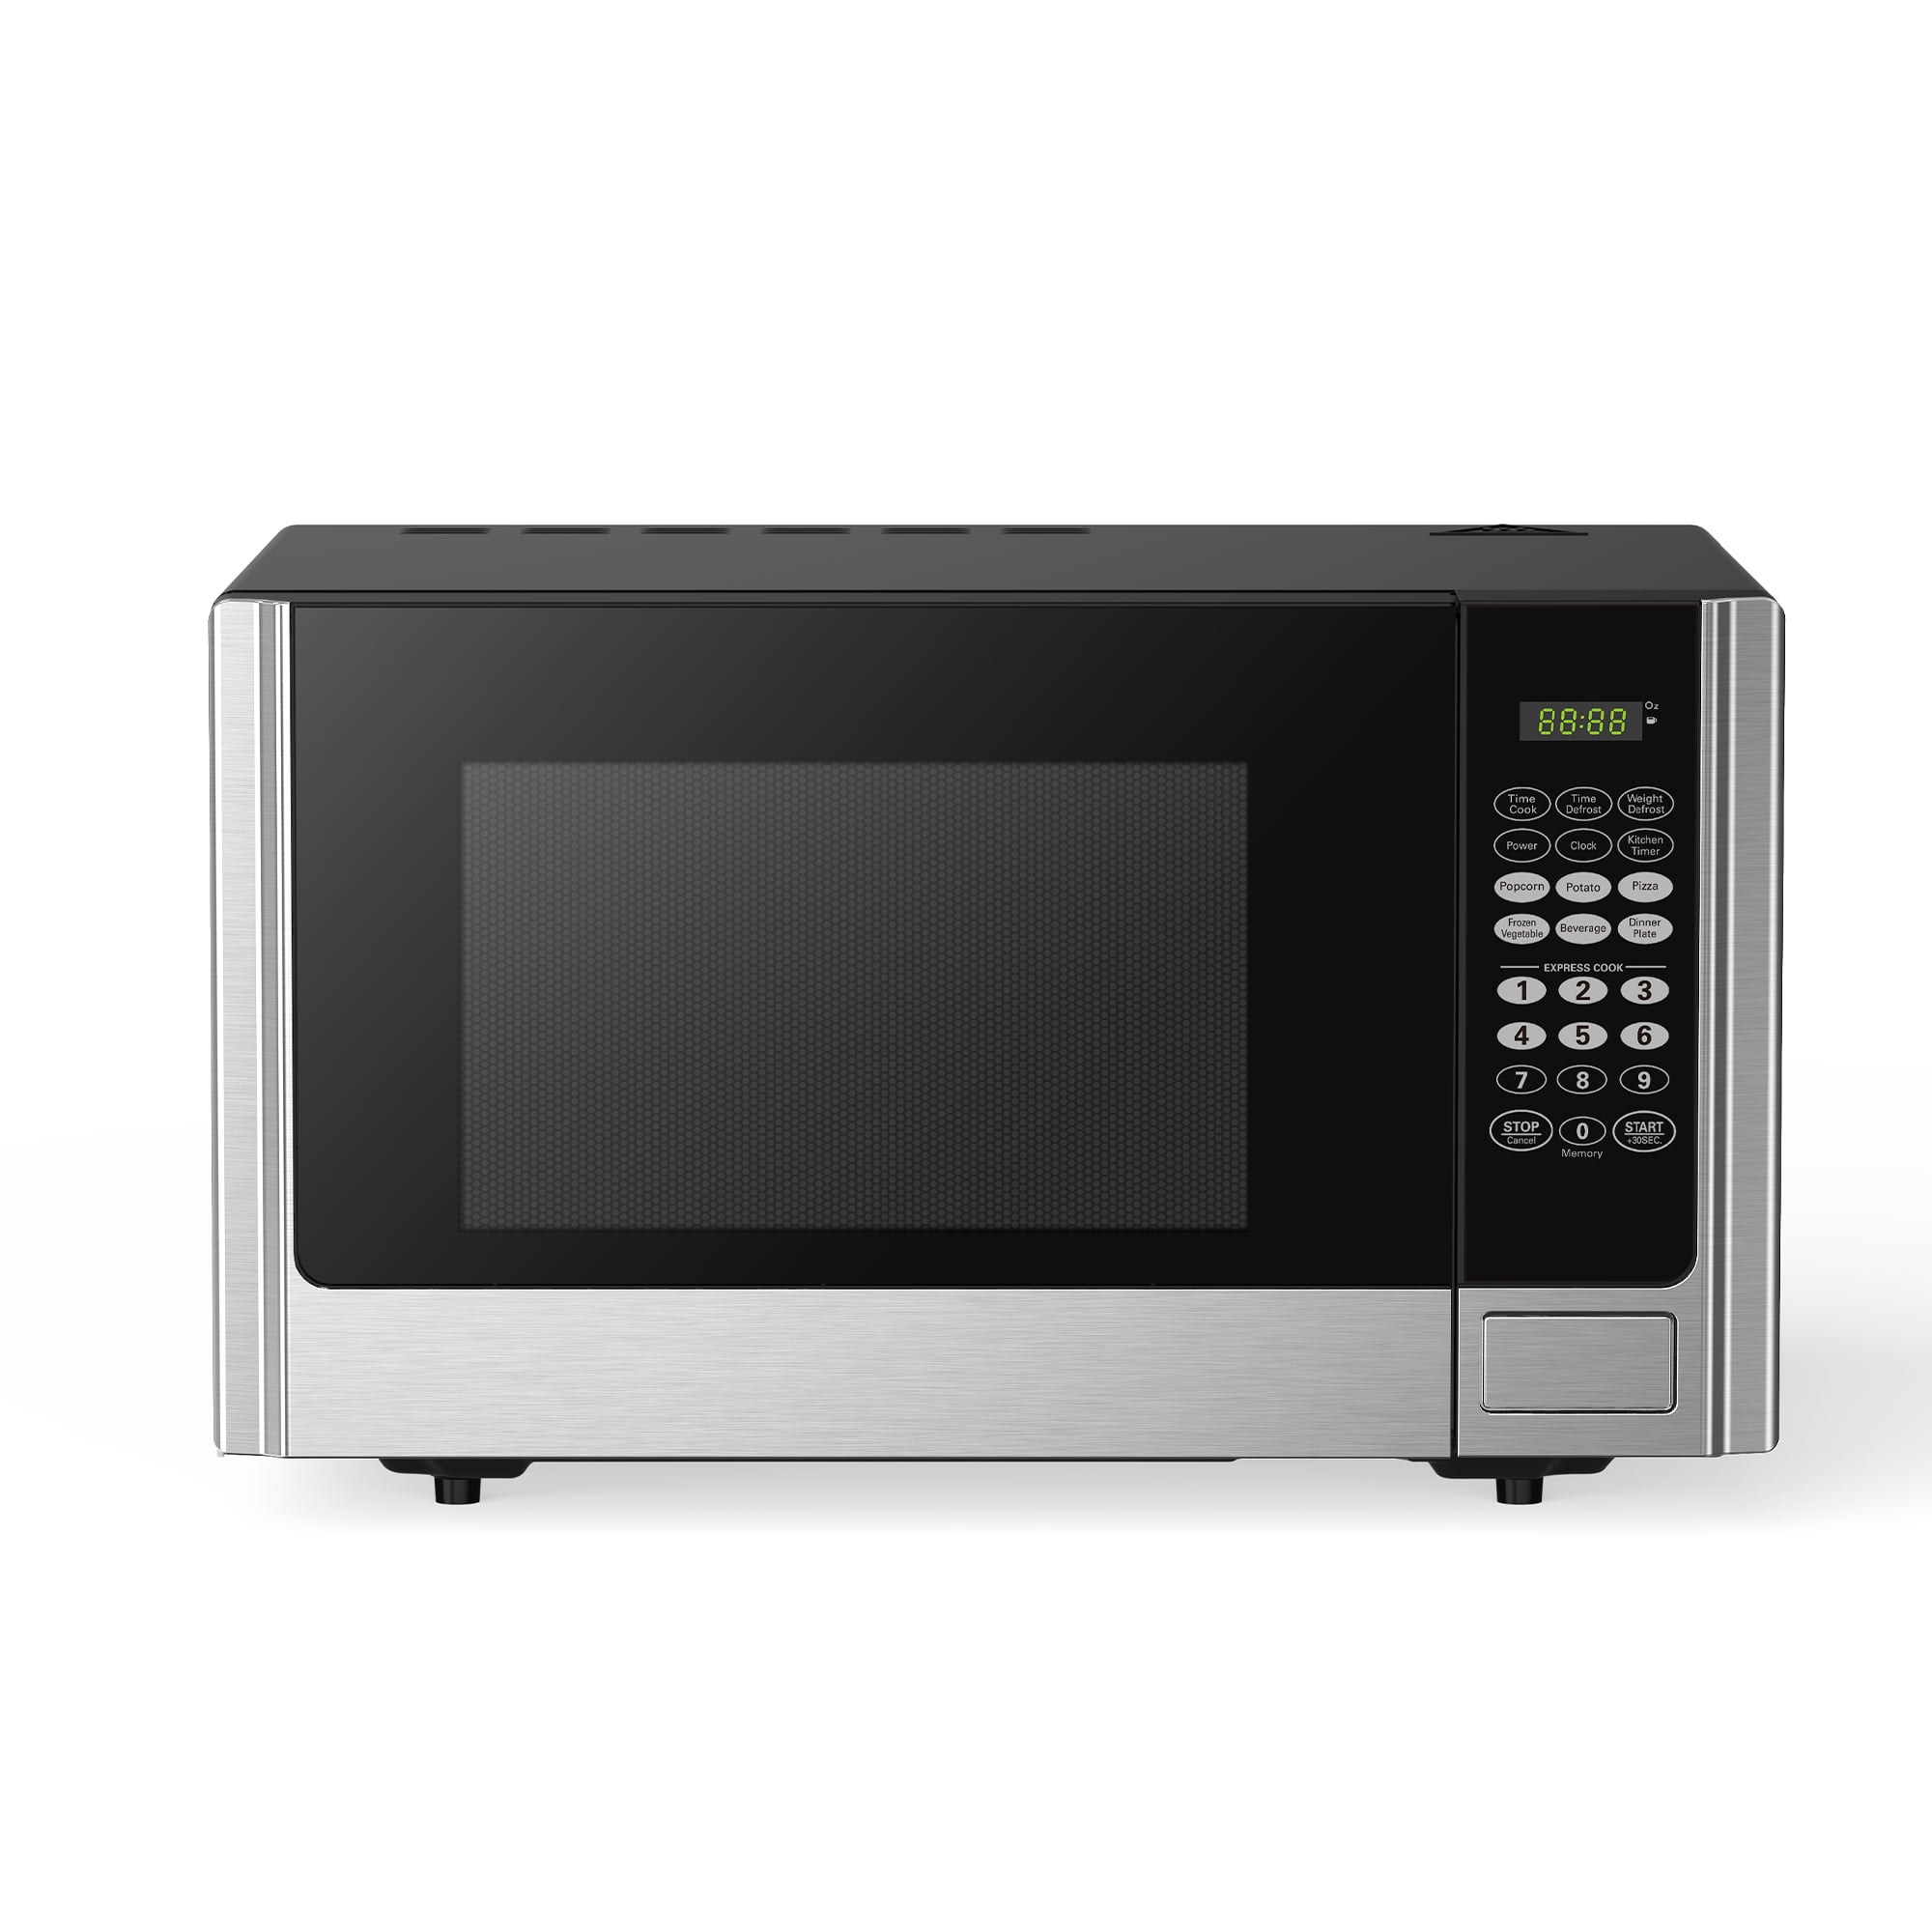 New - Black+Decker EM925AZE-P 900 Watt Microwave Oven - 0.9 cu ft -  Stainless Steel - Tested Works!, NEW LG APPLIANCES - MATTRESSES -  SNOWBLOWER - ELECTRONICS - HOVER BOARDS - KIDS POWER WHEELS- AND MORE!